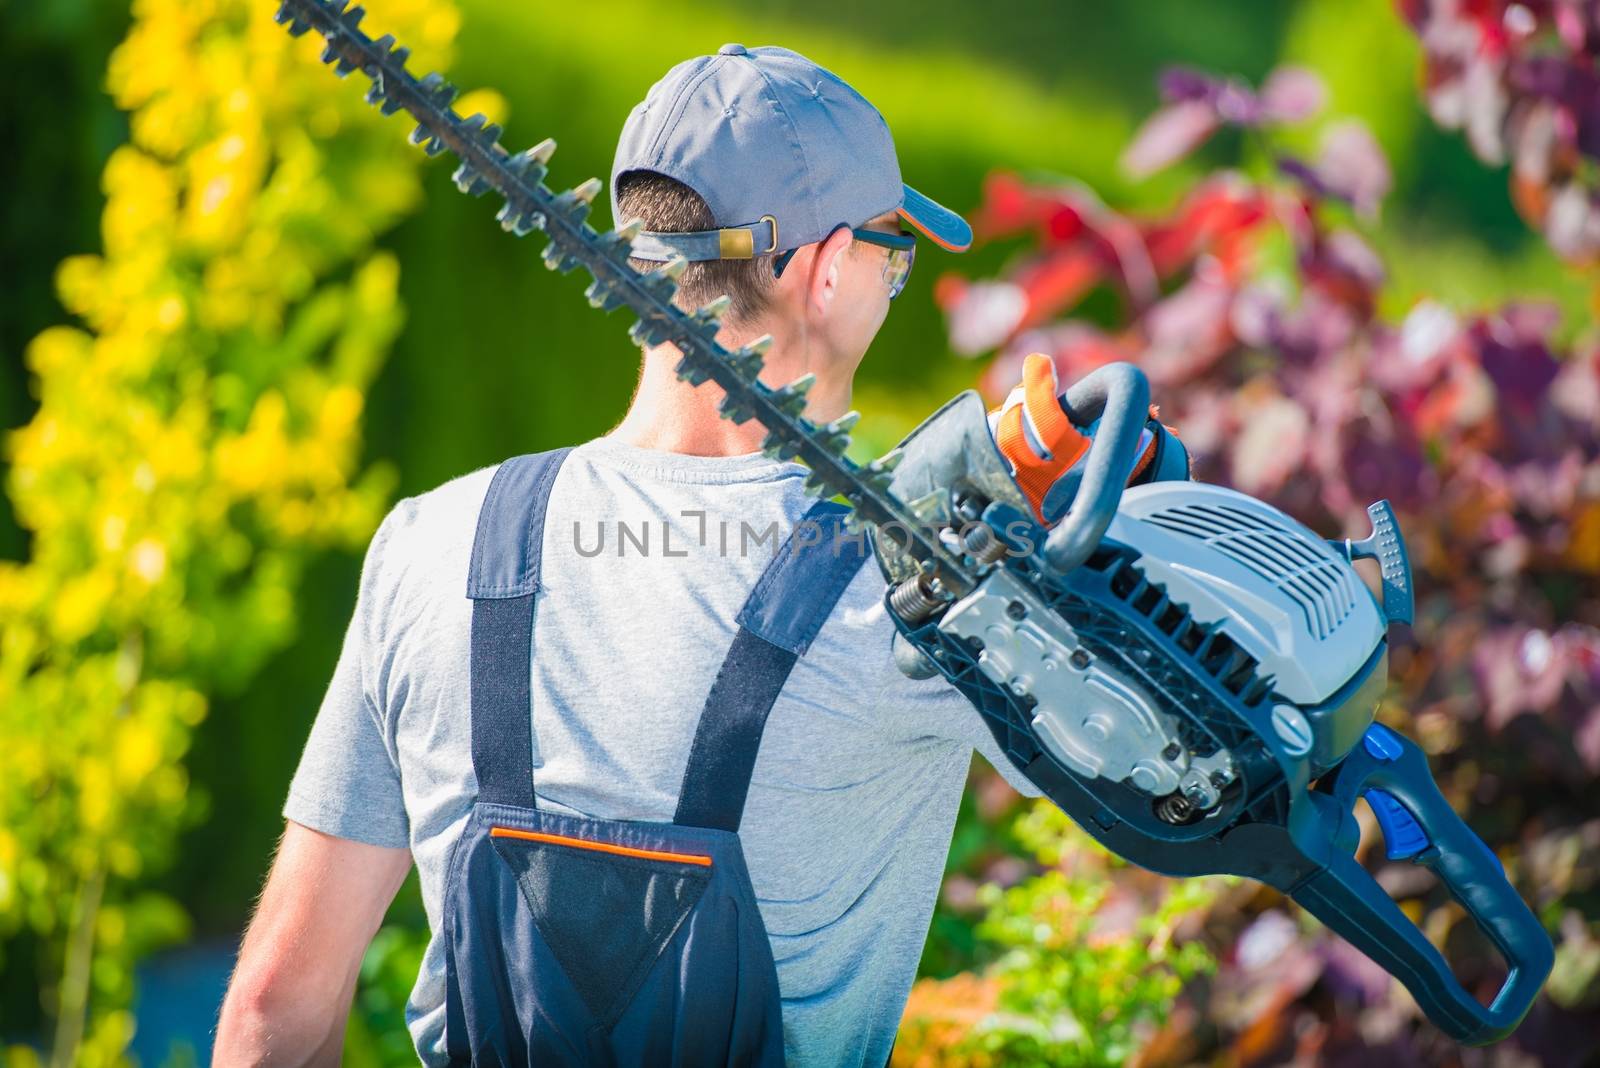 Gardener with Hedge Trimmer by welcomia